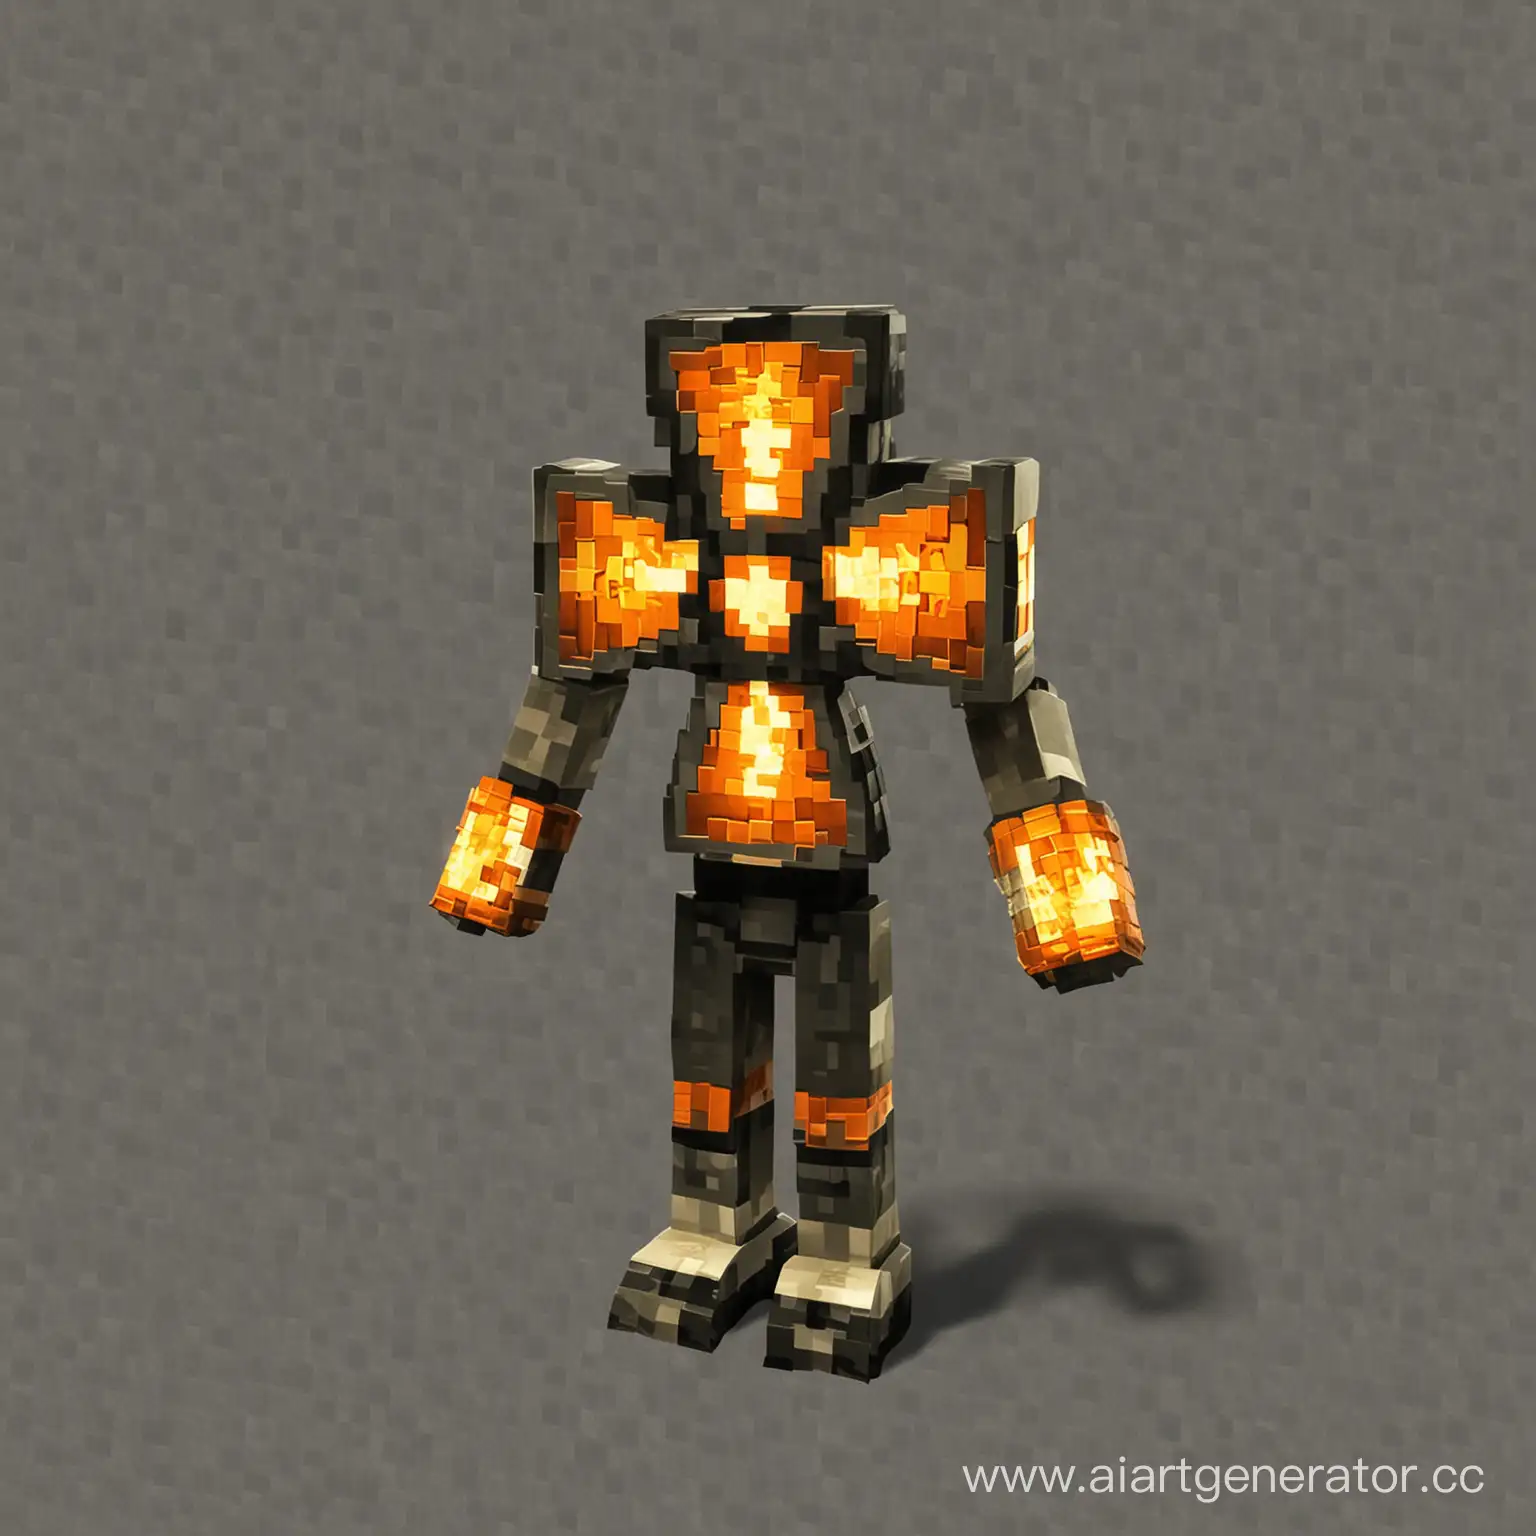 Minecraft-Nuclear-Mod-Avatar-Crafting-Atomic-Power-in-Pixelated-Worlds